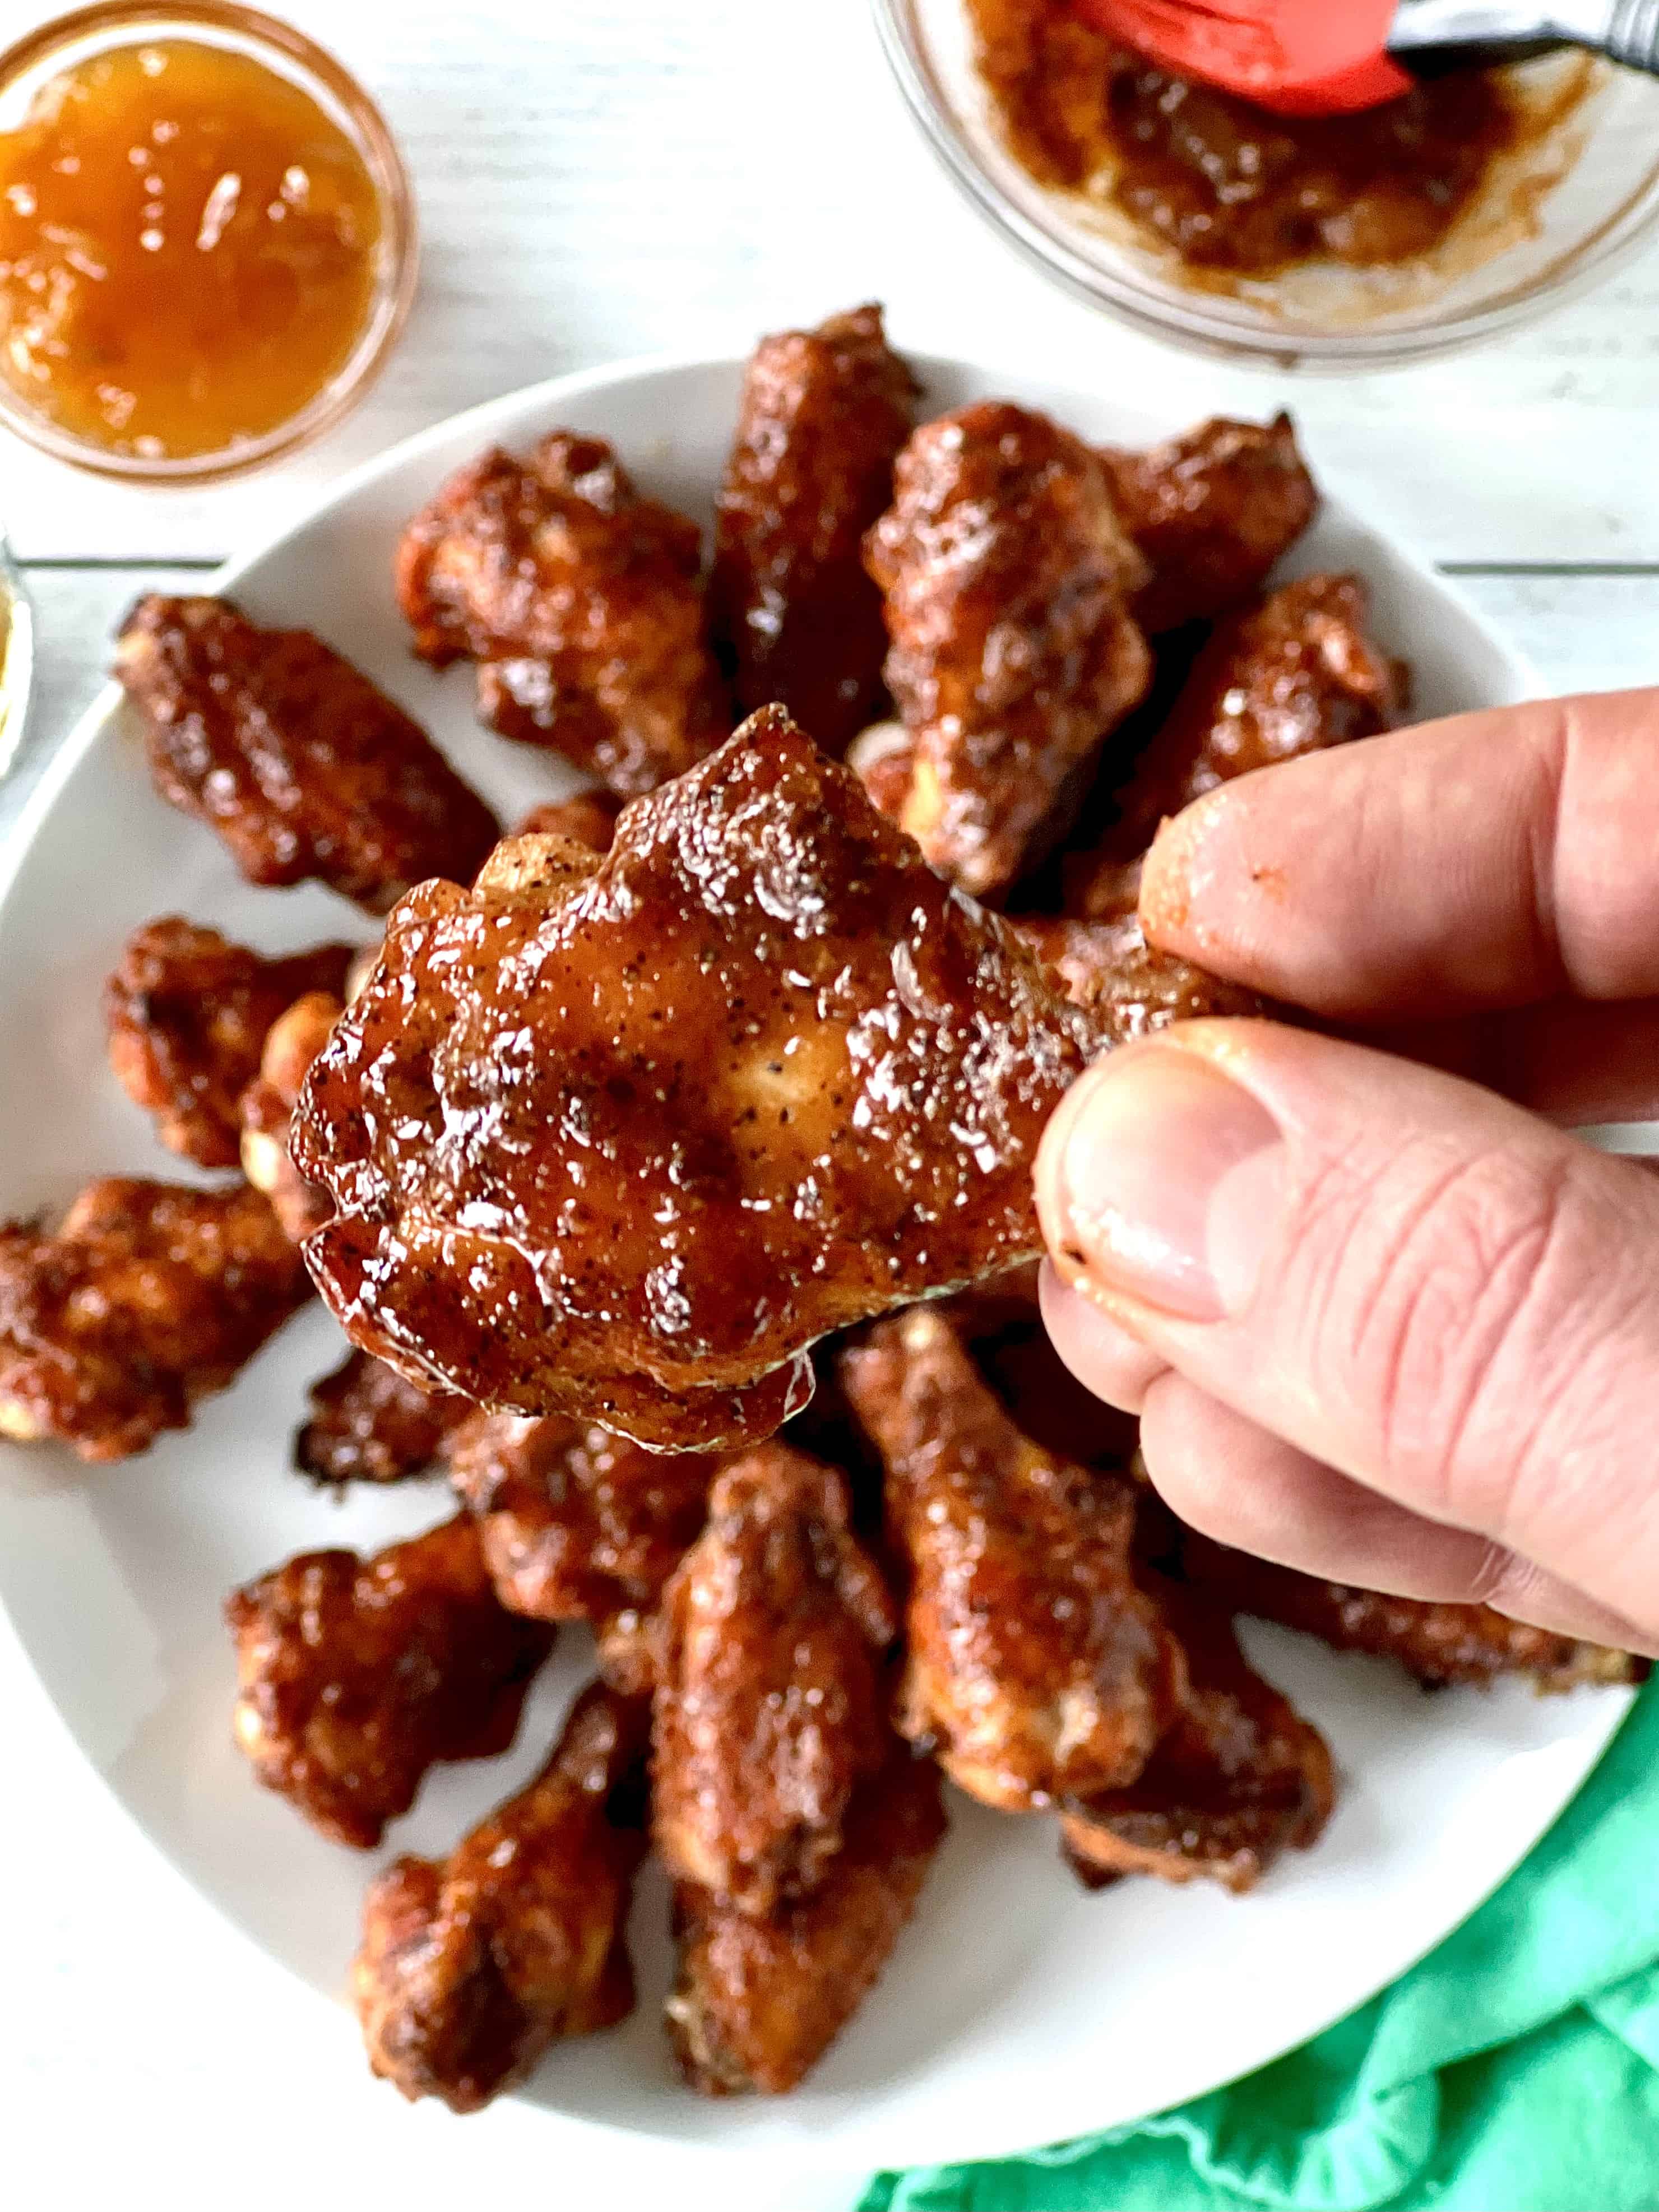 a hand holding up an apricot glazed chicken wing over a white plate of more wings